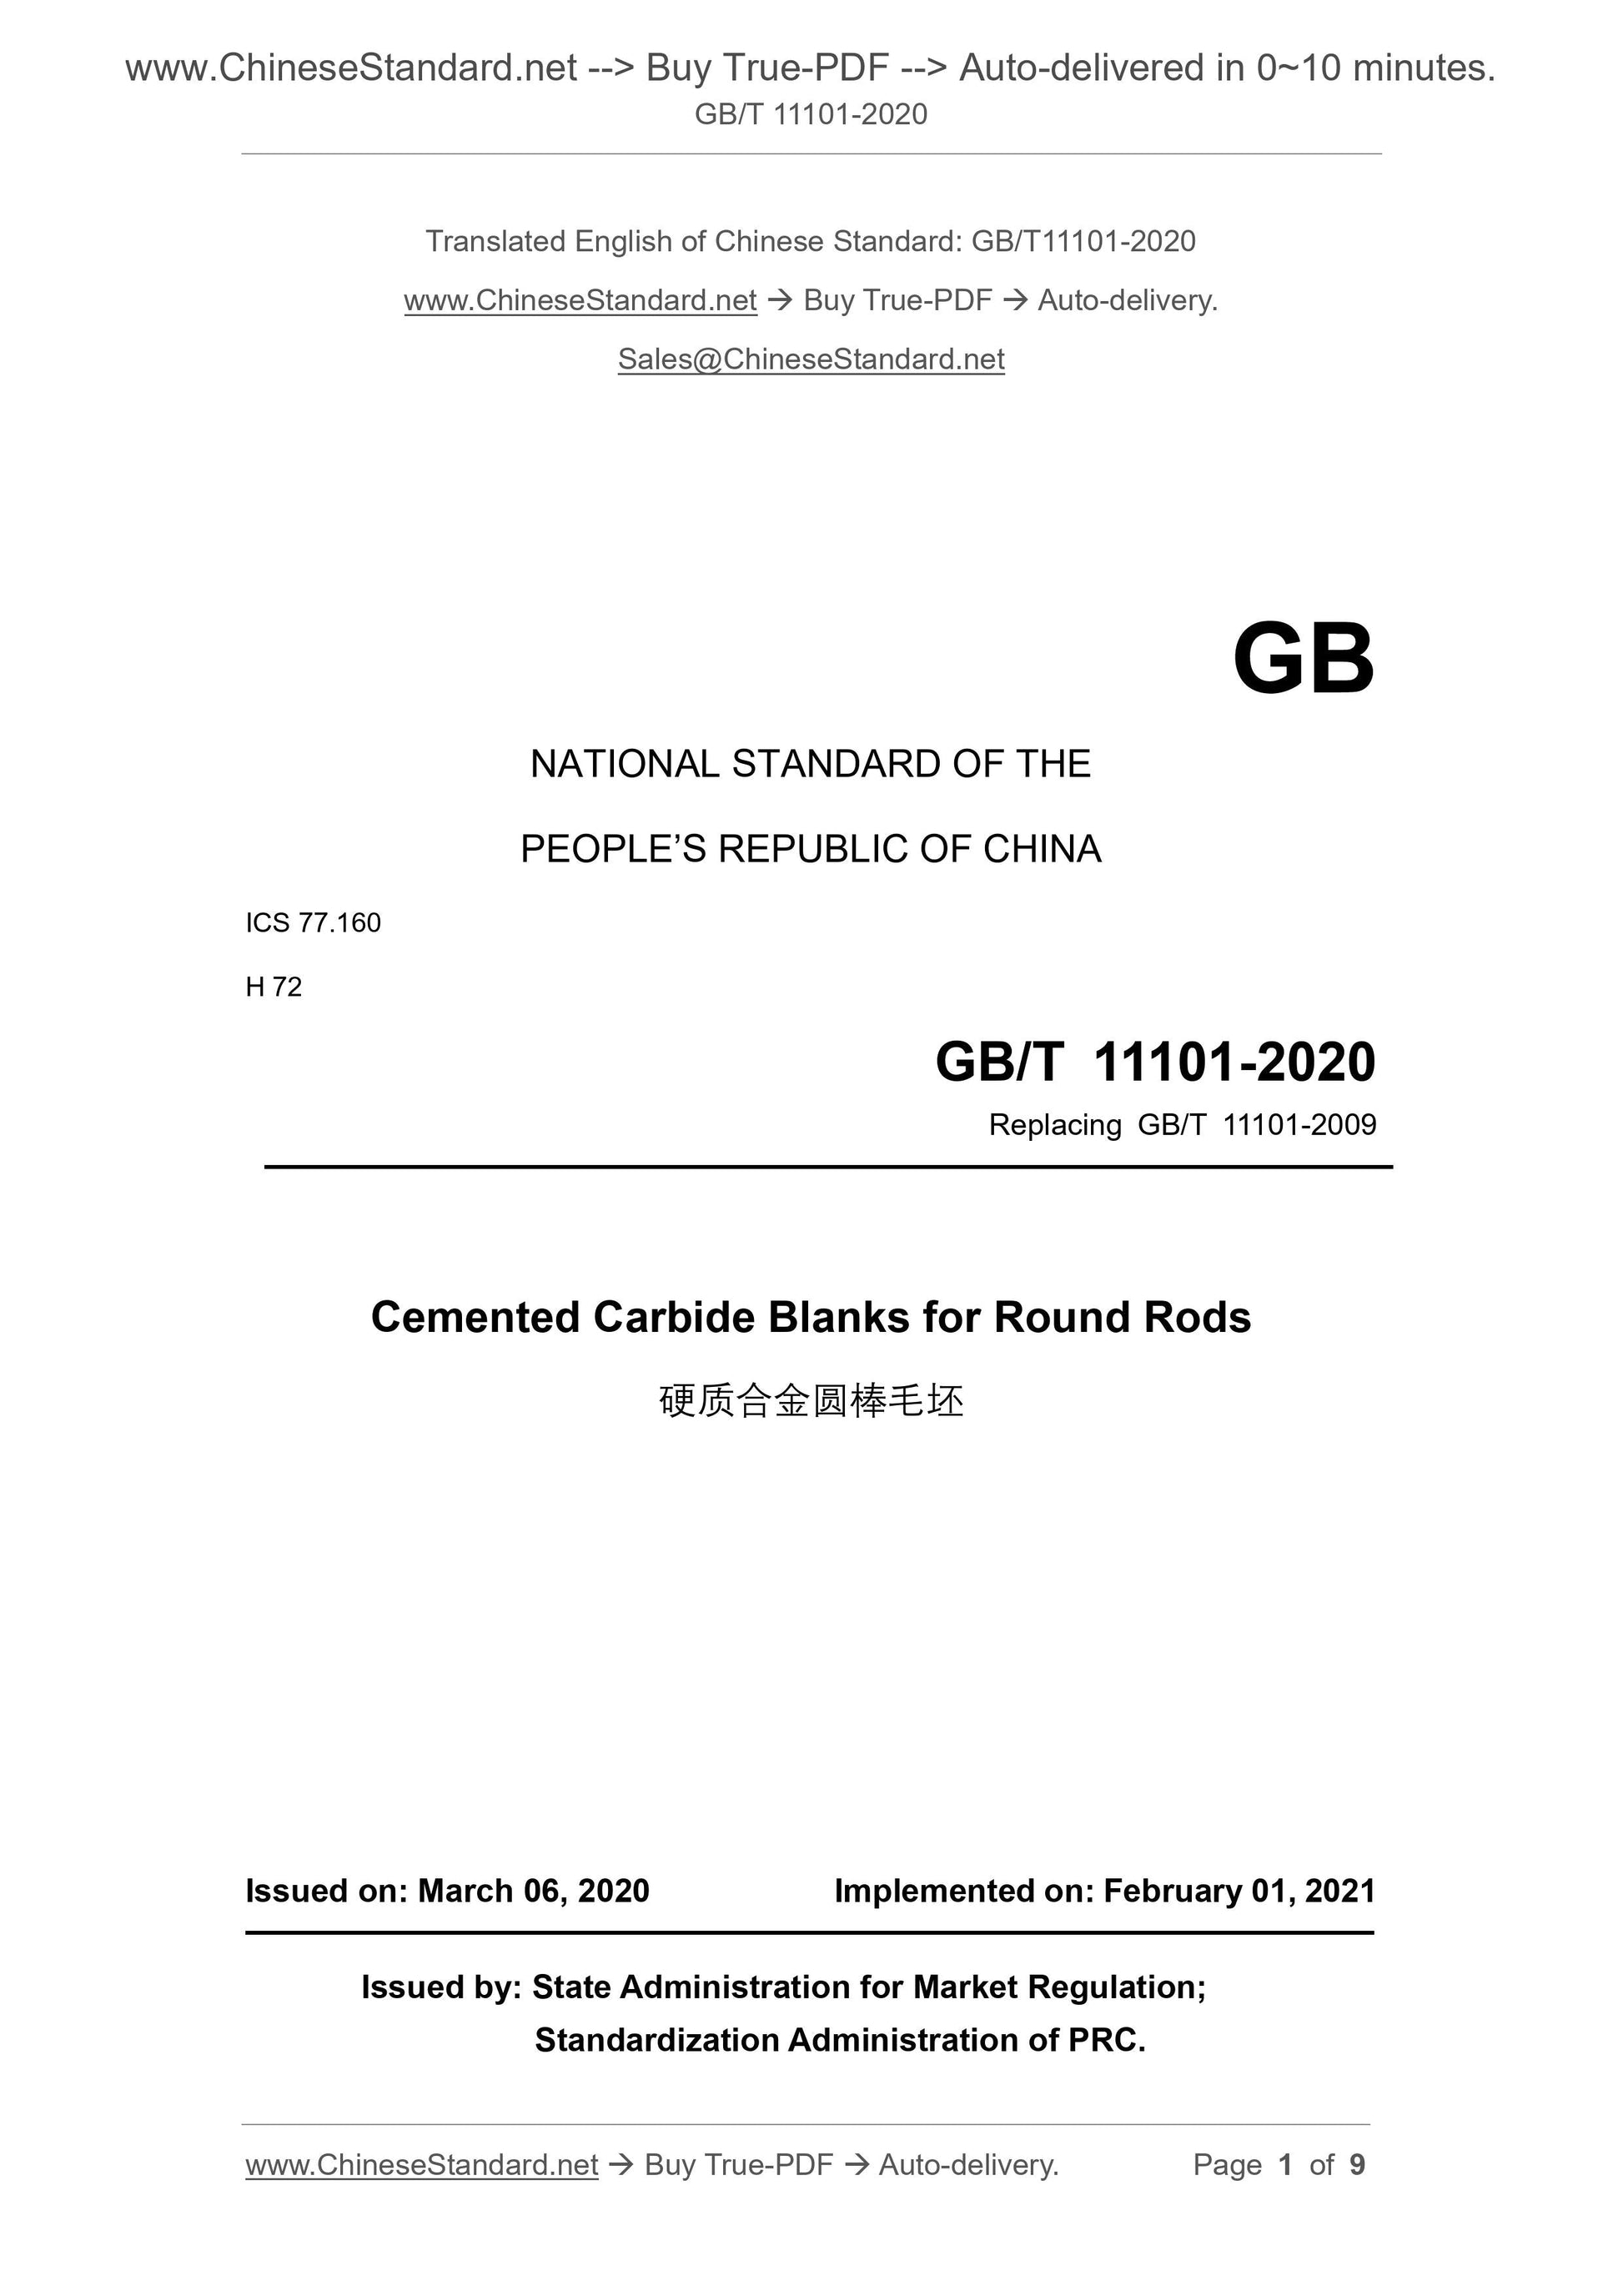 GB/T 11101-2020 Page 1